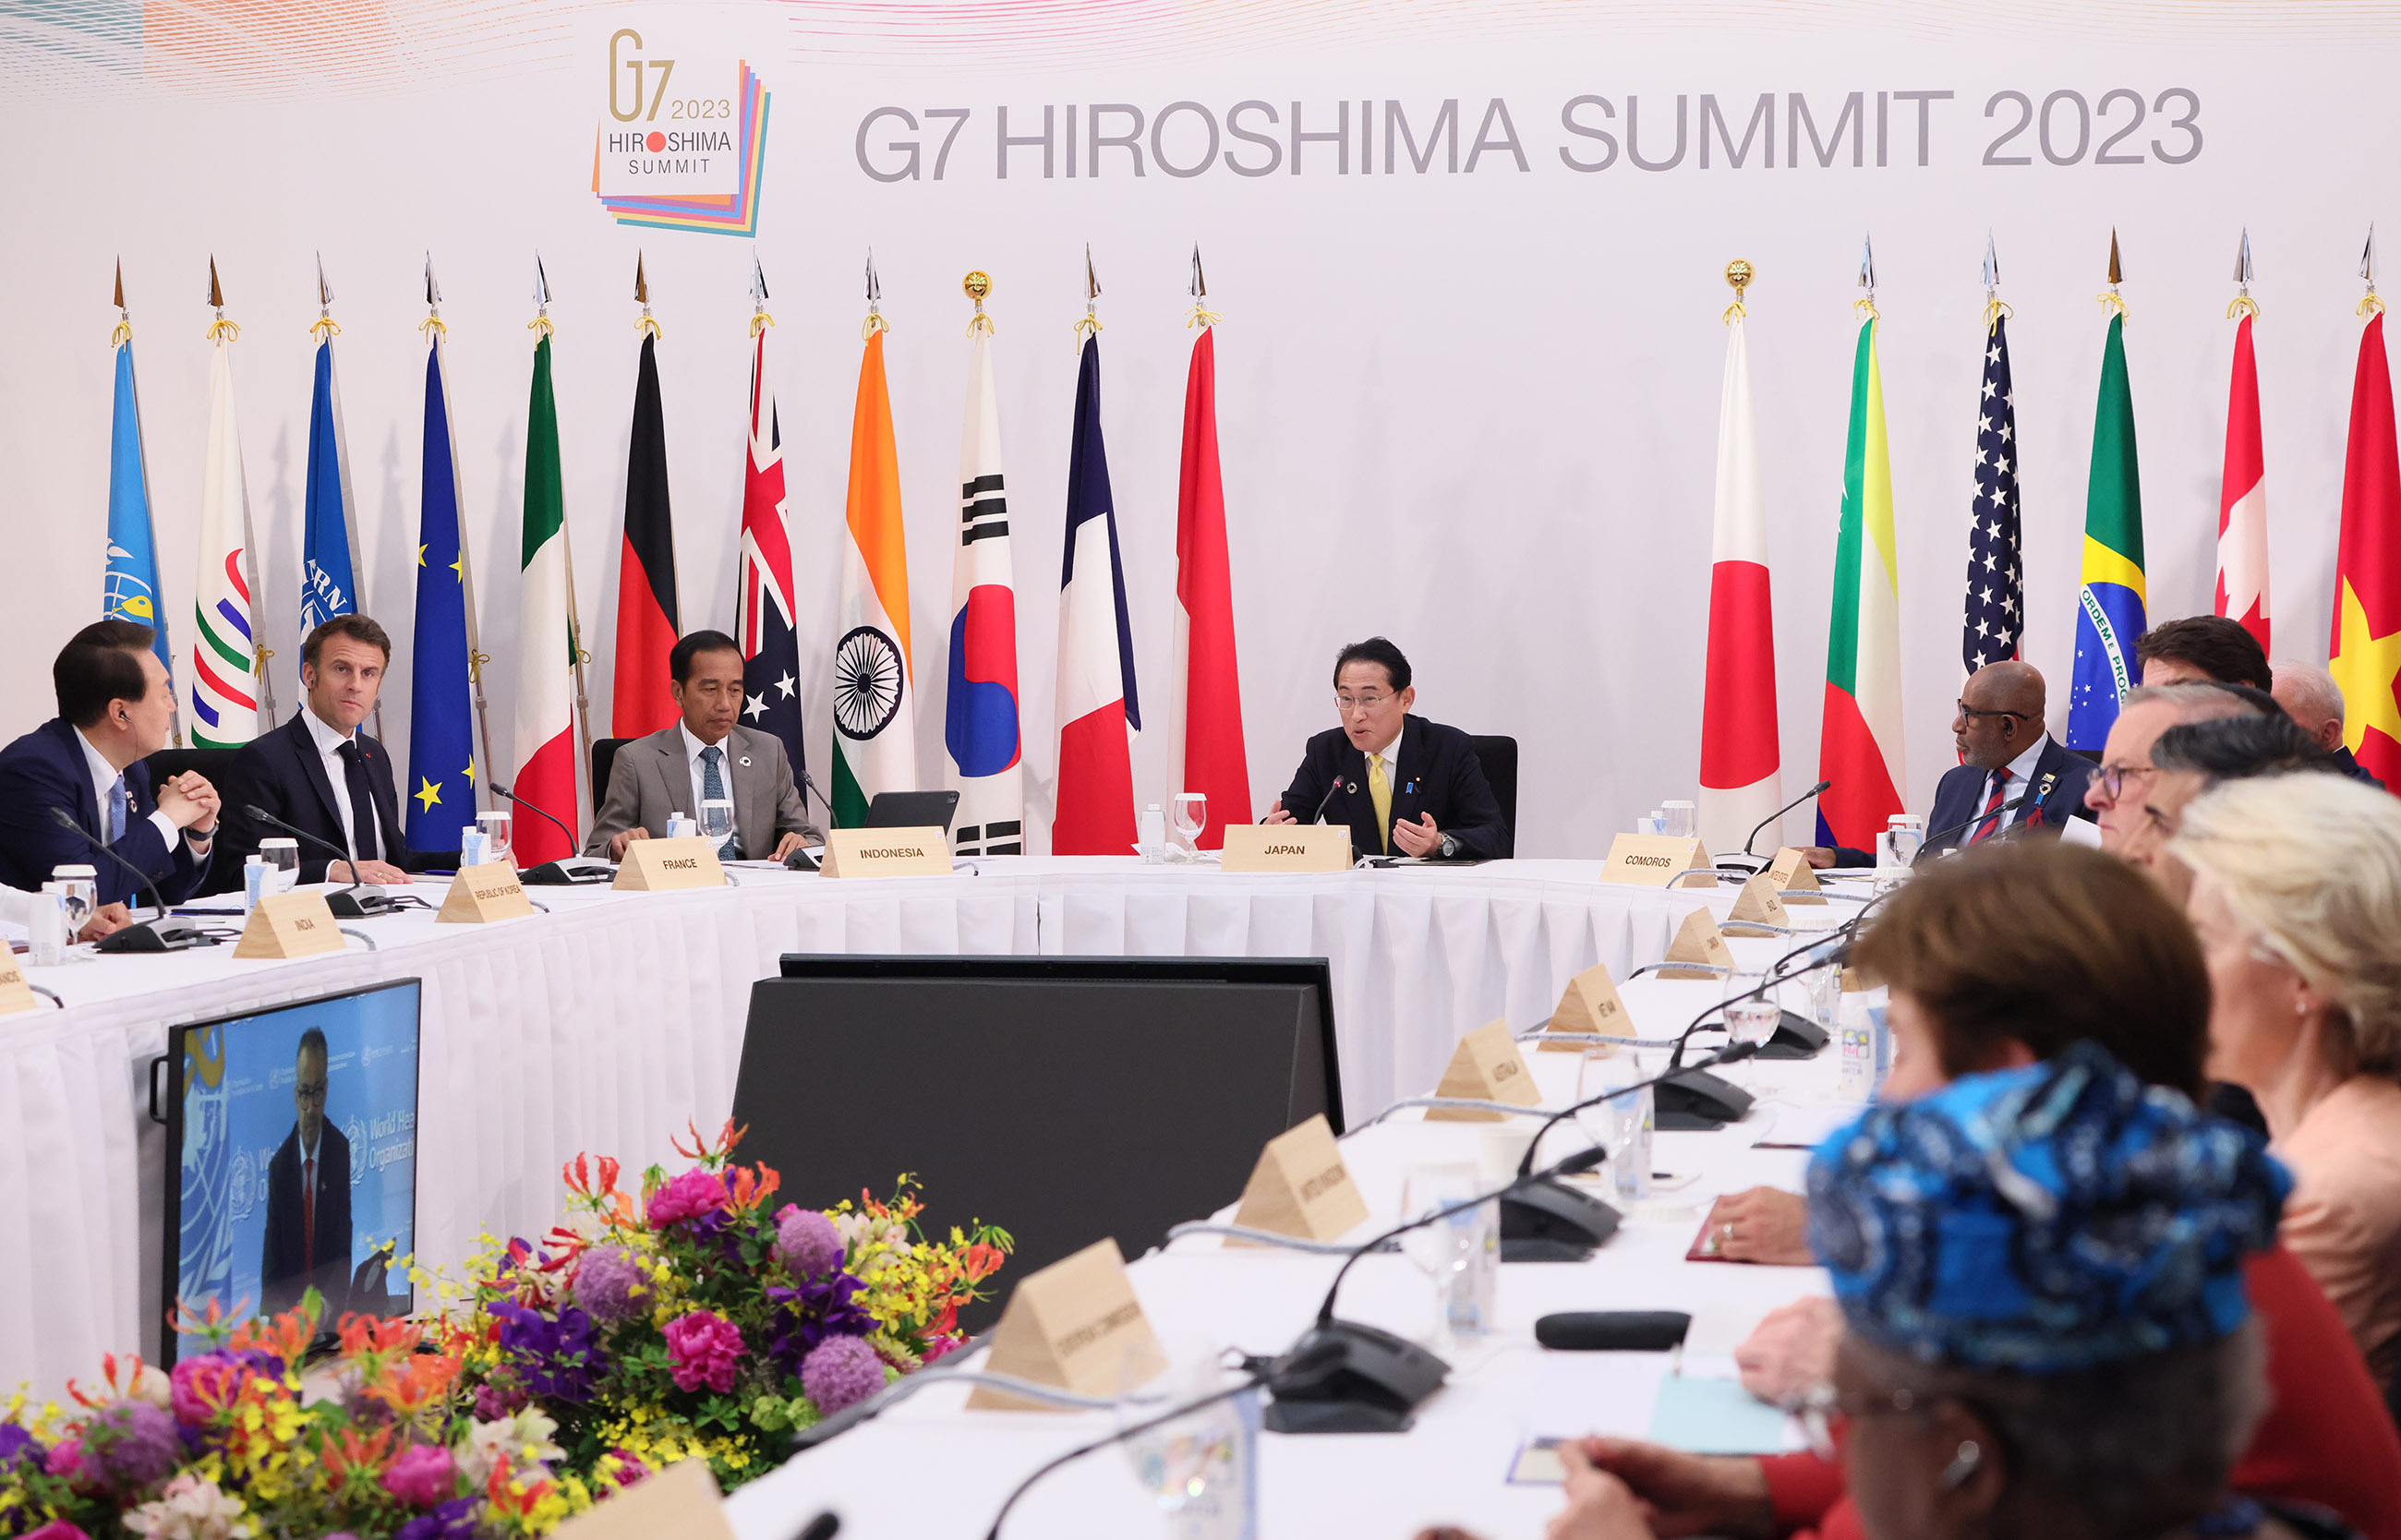 Prime Minister Kishida engaging in discussions at Session 6 (3)